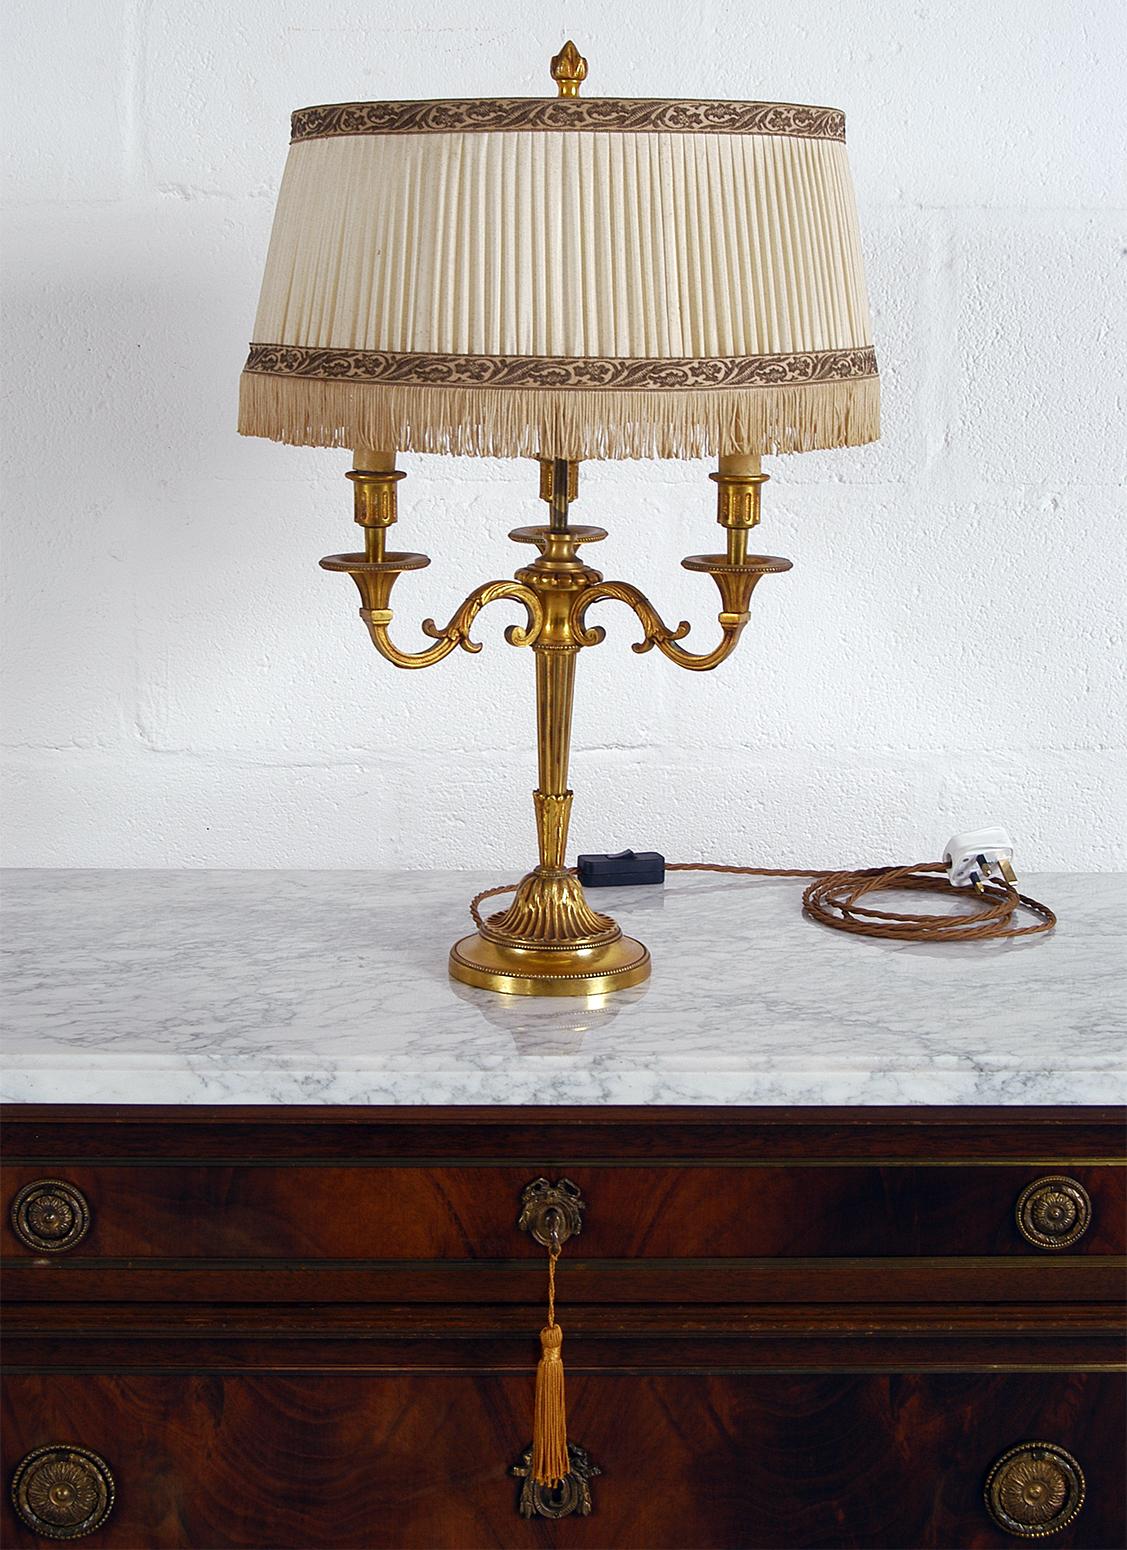 This attractive mid-20th century French gilt brass Bouillotte three-arm table lamp has a heavy brass base and retains its original pressed card faux candles and fringed pleated shade.
It has been gently cleaned and rewired to UK 240v specification,